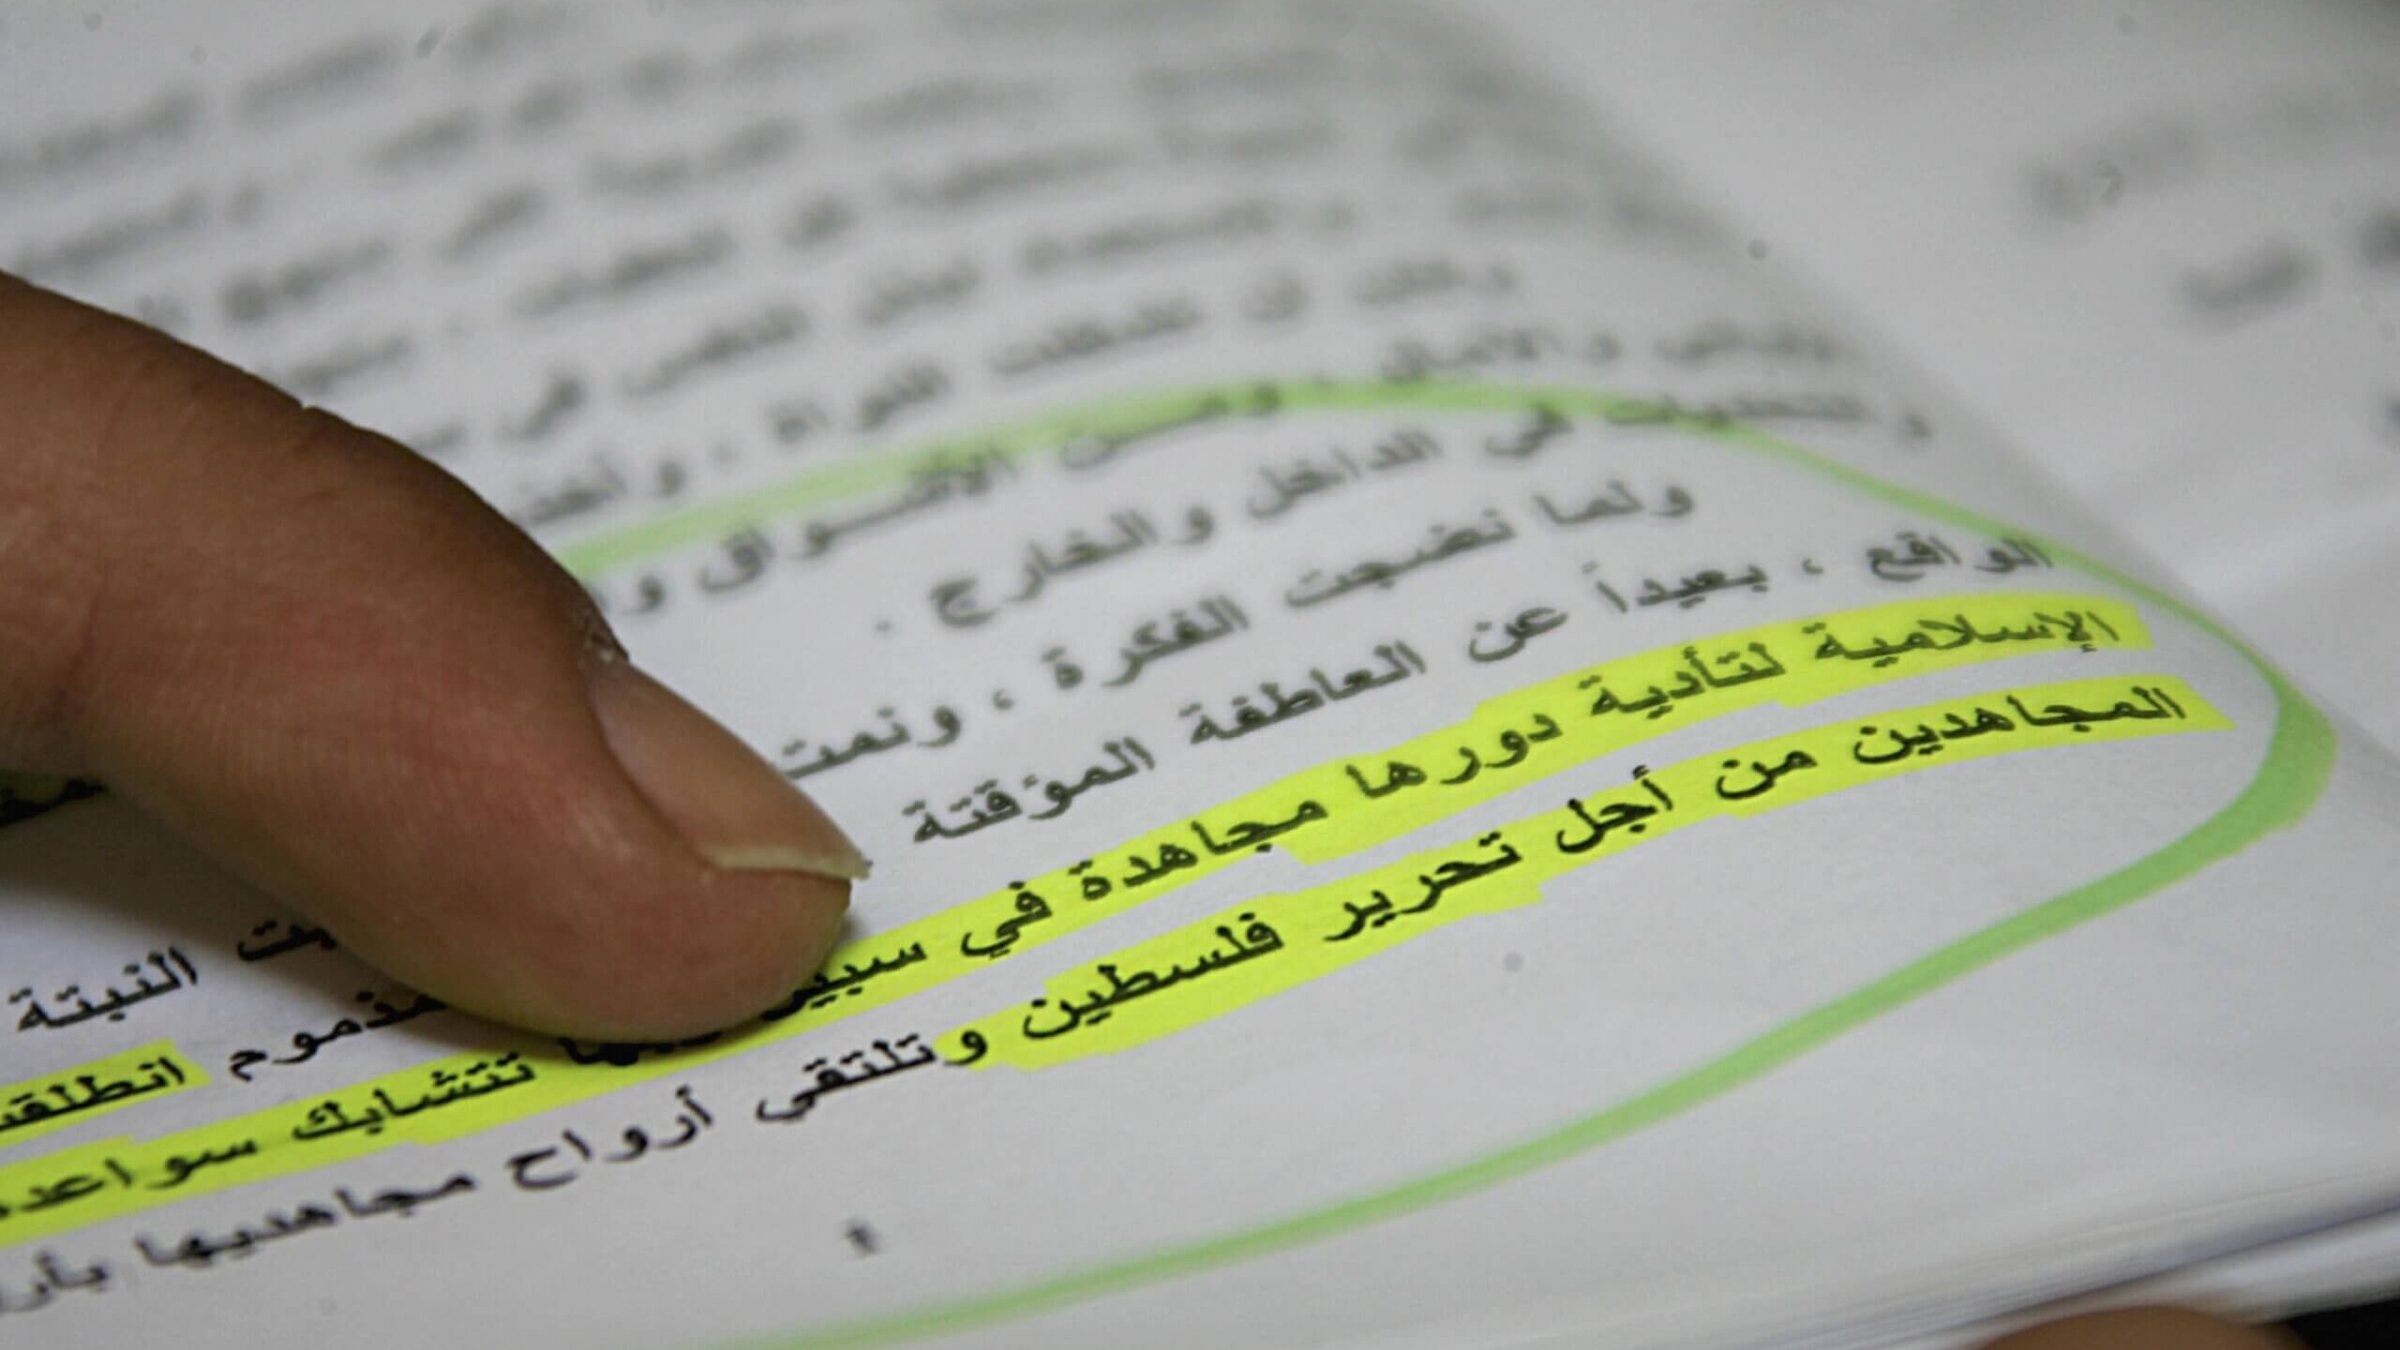 A Palestinian member of Hamas holds an Arabic copy of its charter in 2006. The highlighted sentence reads "When our enemies usurp some Islamic lands, Jihad becomes a duty binding on all Muslims. In order to face the usurping of Palestine by the Jews, we have no escape from raising the banner of Jihad." 